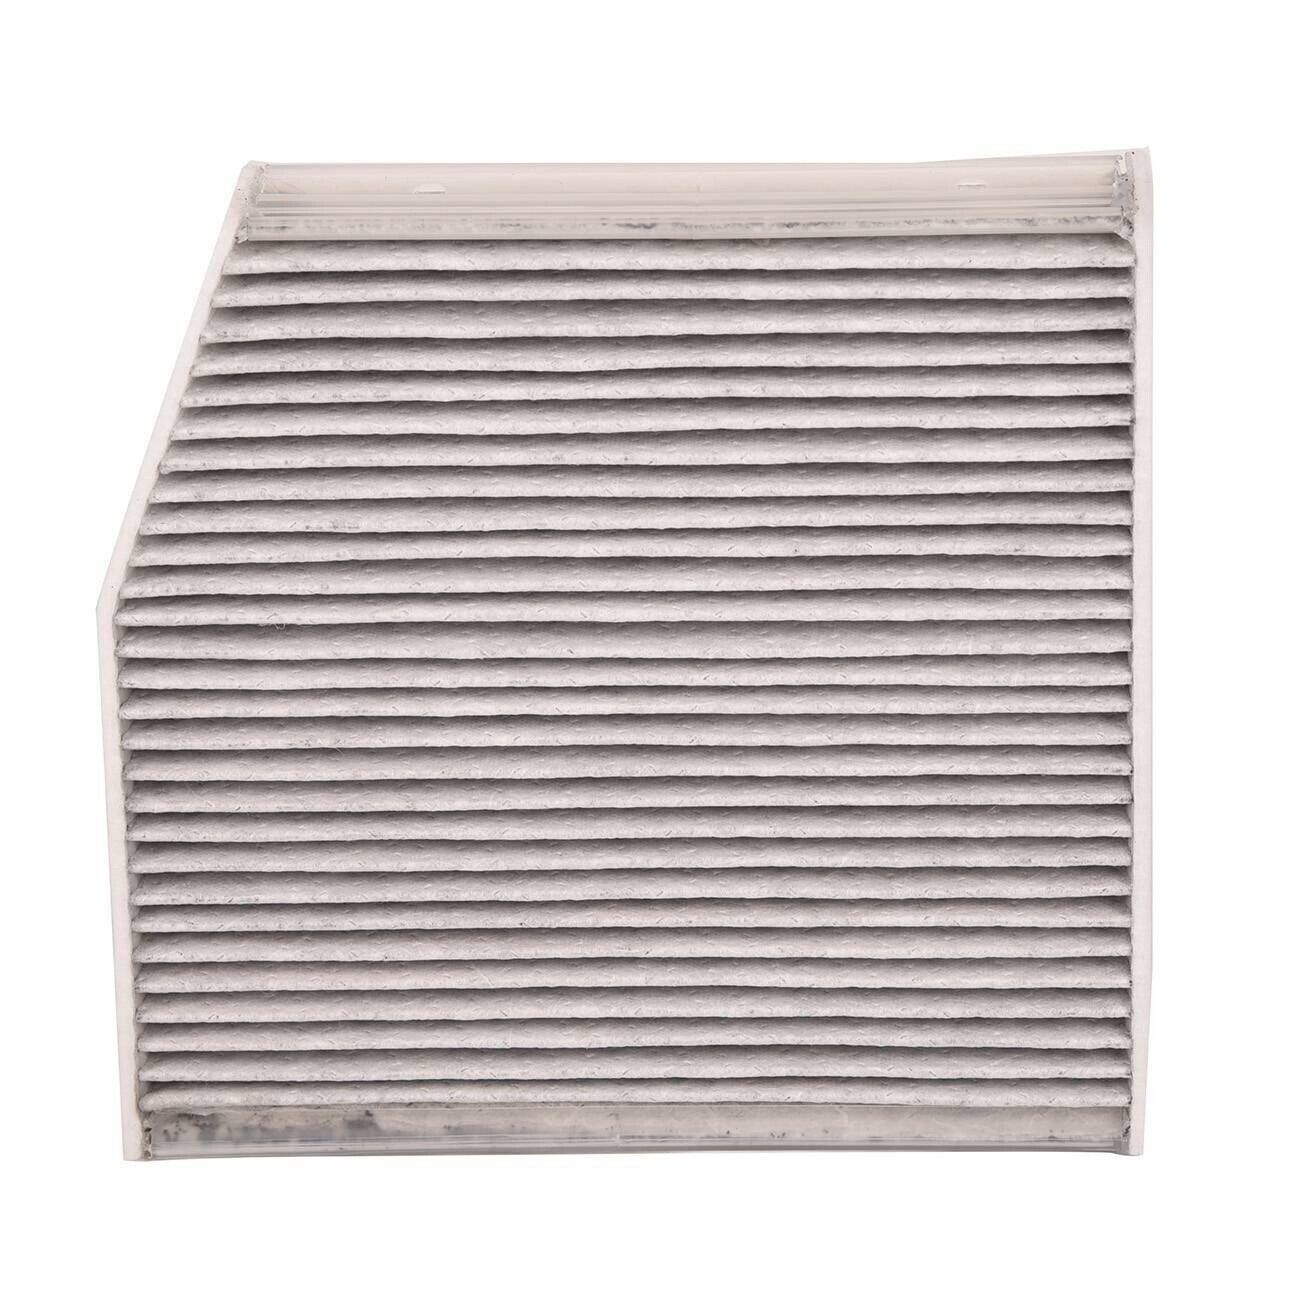 Cabin Air Filter 2468300018 Fits For Mercedes Benz CLA250 GLA250 CLA45 AMG